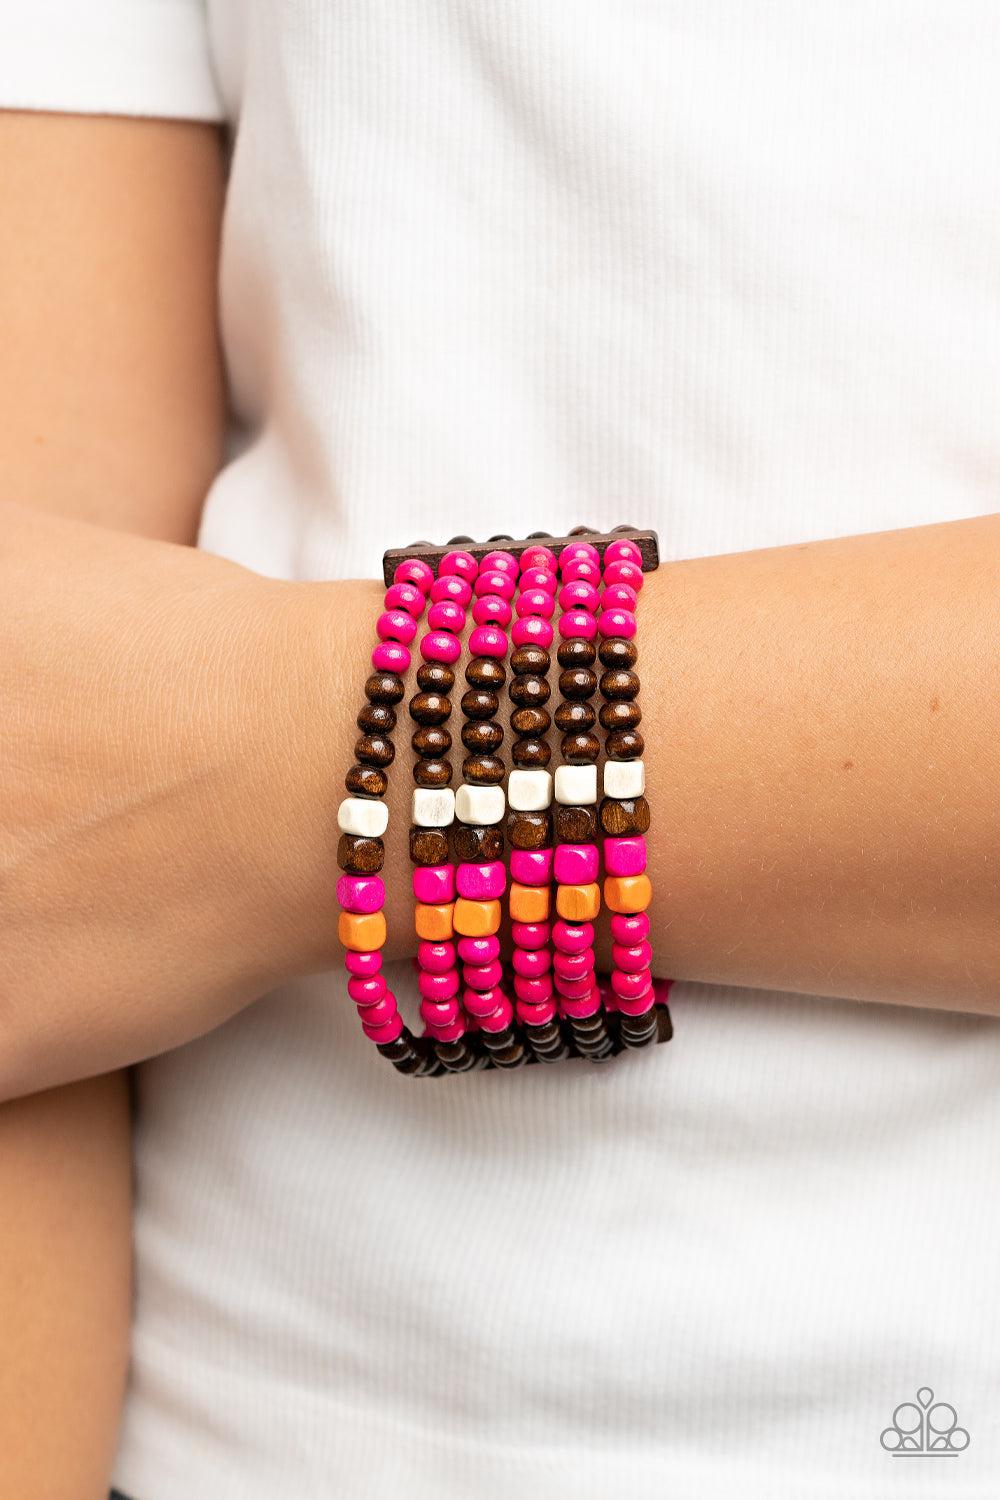 Dive into Maldives Pink & Brown Wood Bracelet - Paparazzi Accessories- lightbox - CarasShop.com - $5 Jewelry by Cara Jewels